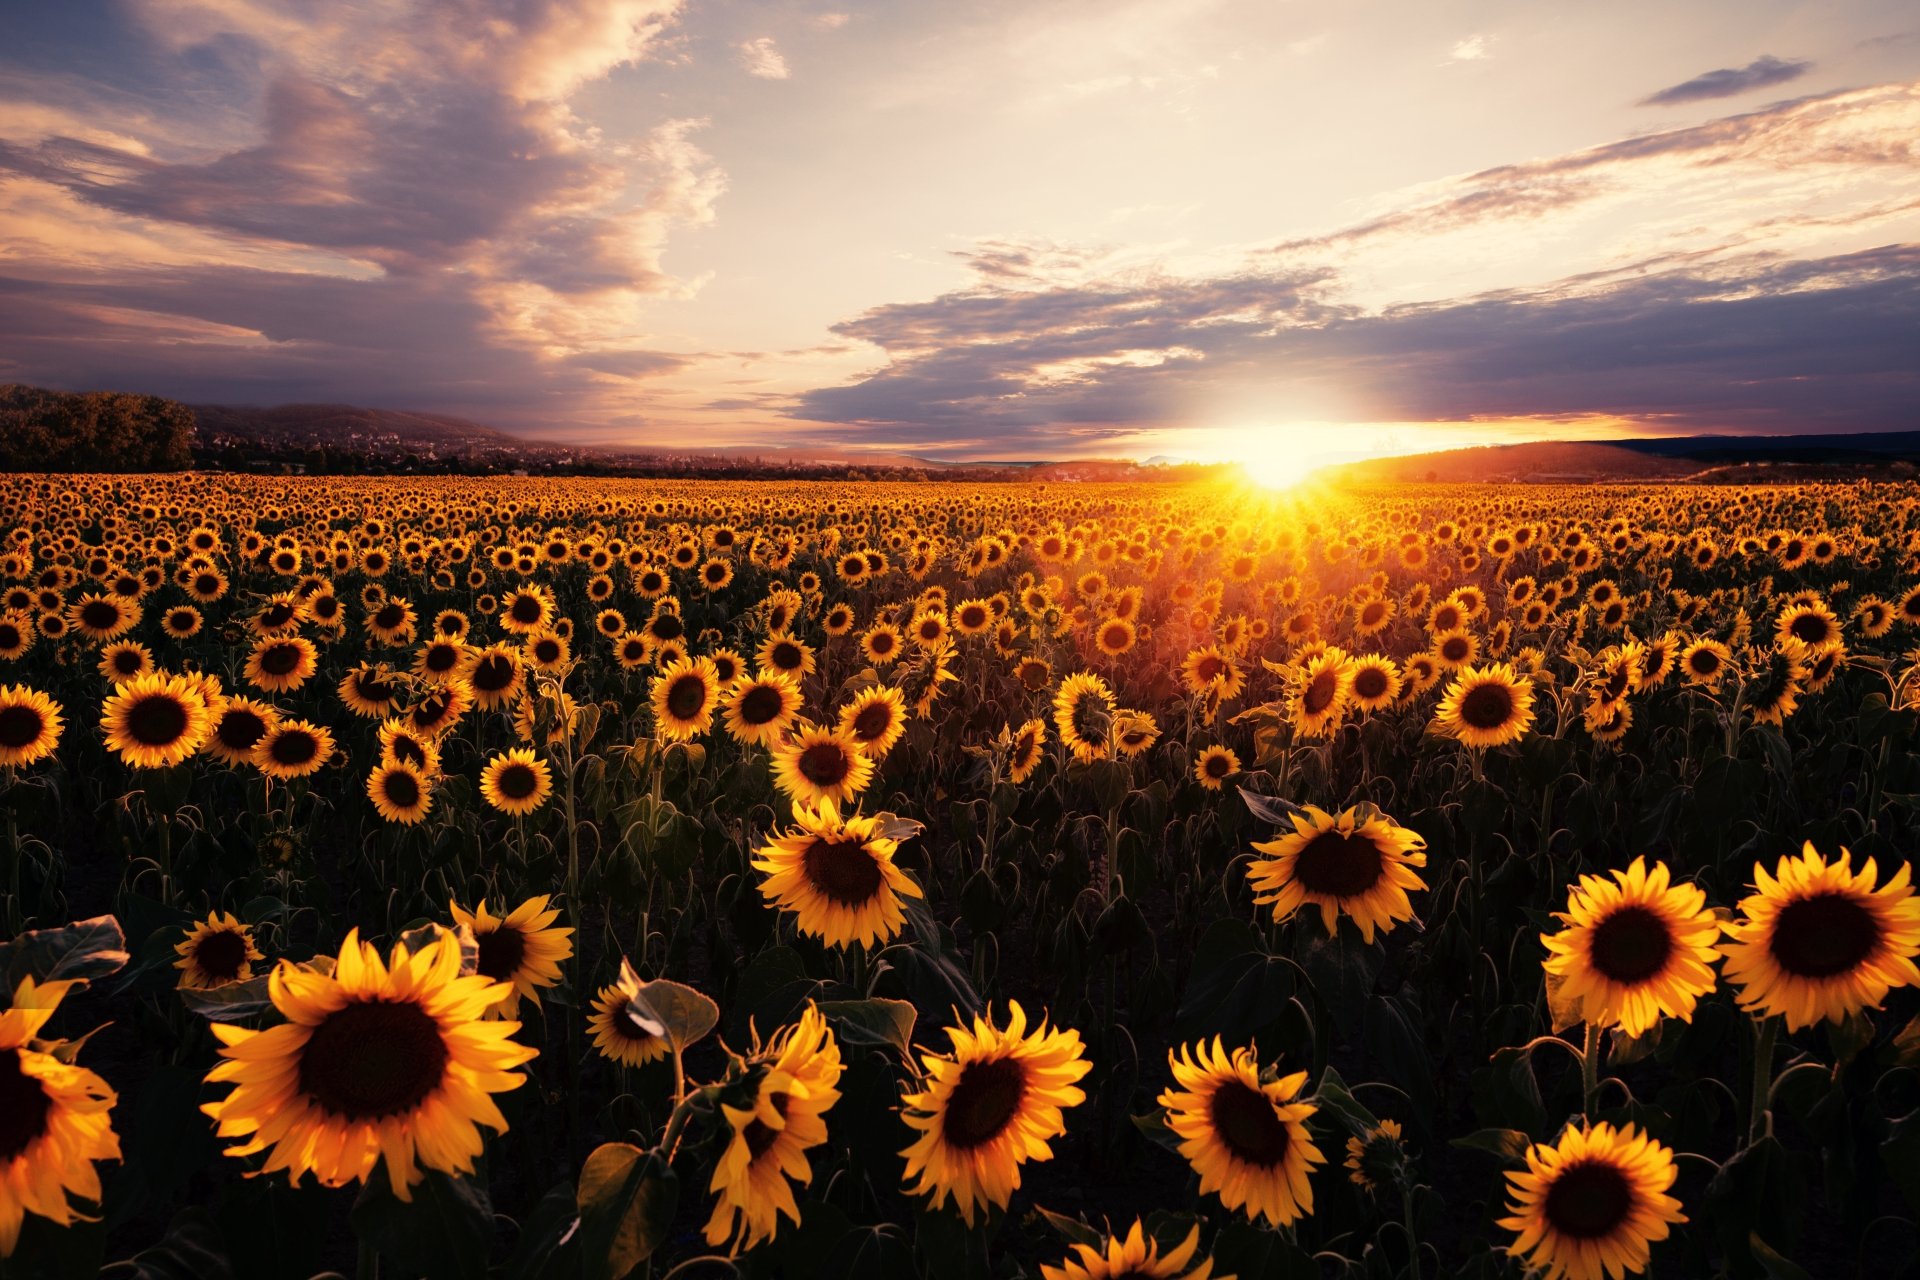 15 Choices aesthetic sunflower wallpaper for chromebook You Can Save It ...